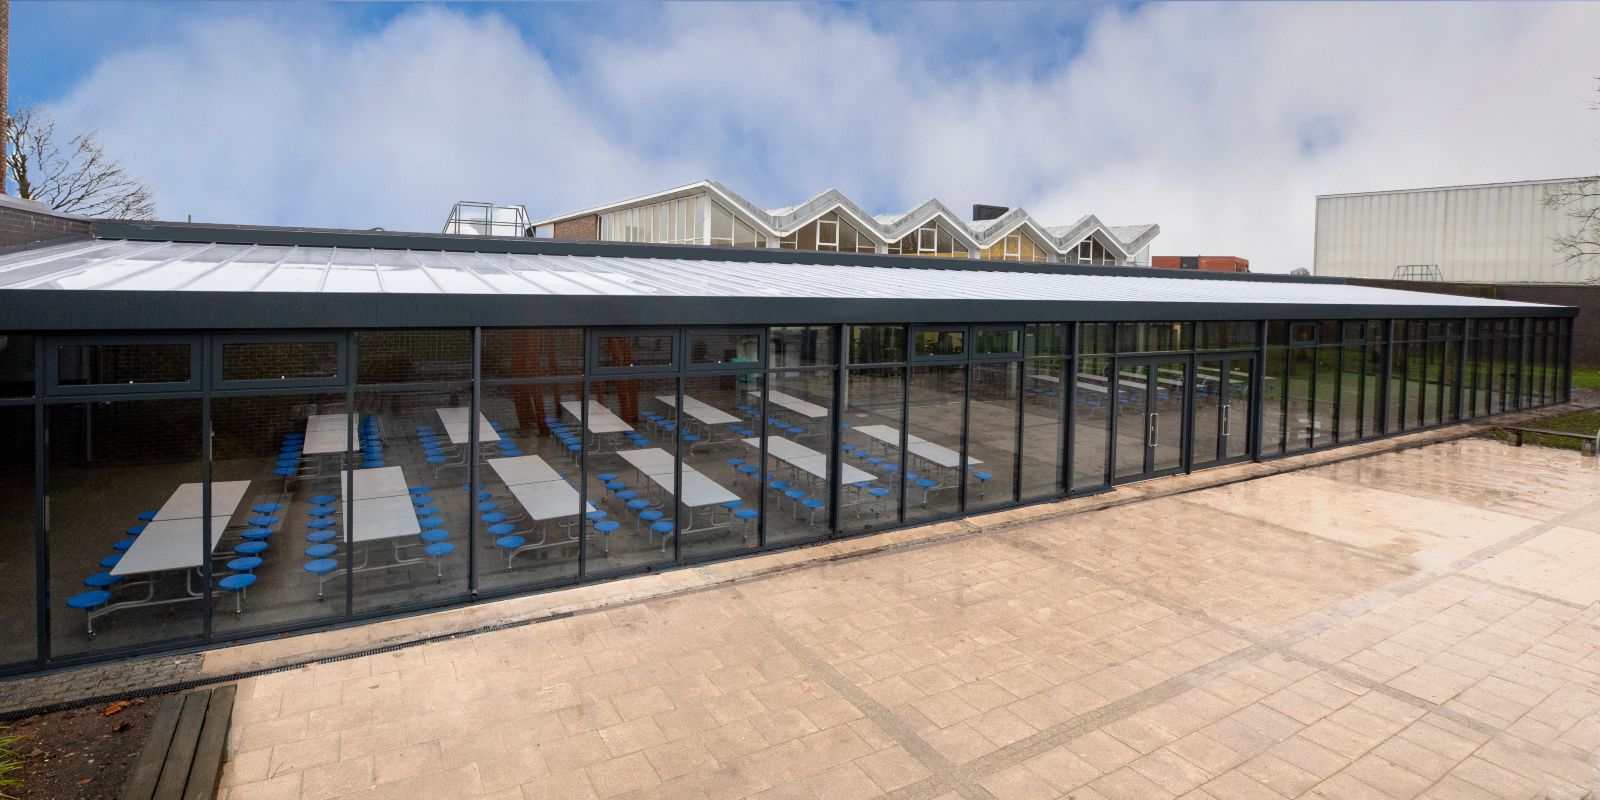 Outdoor Dining Canopy at Wednesfield High Academy